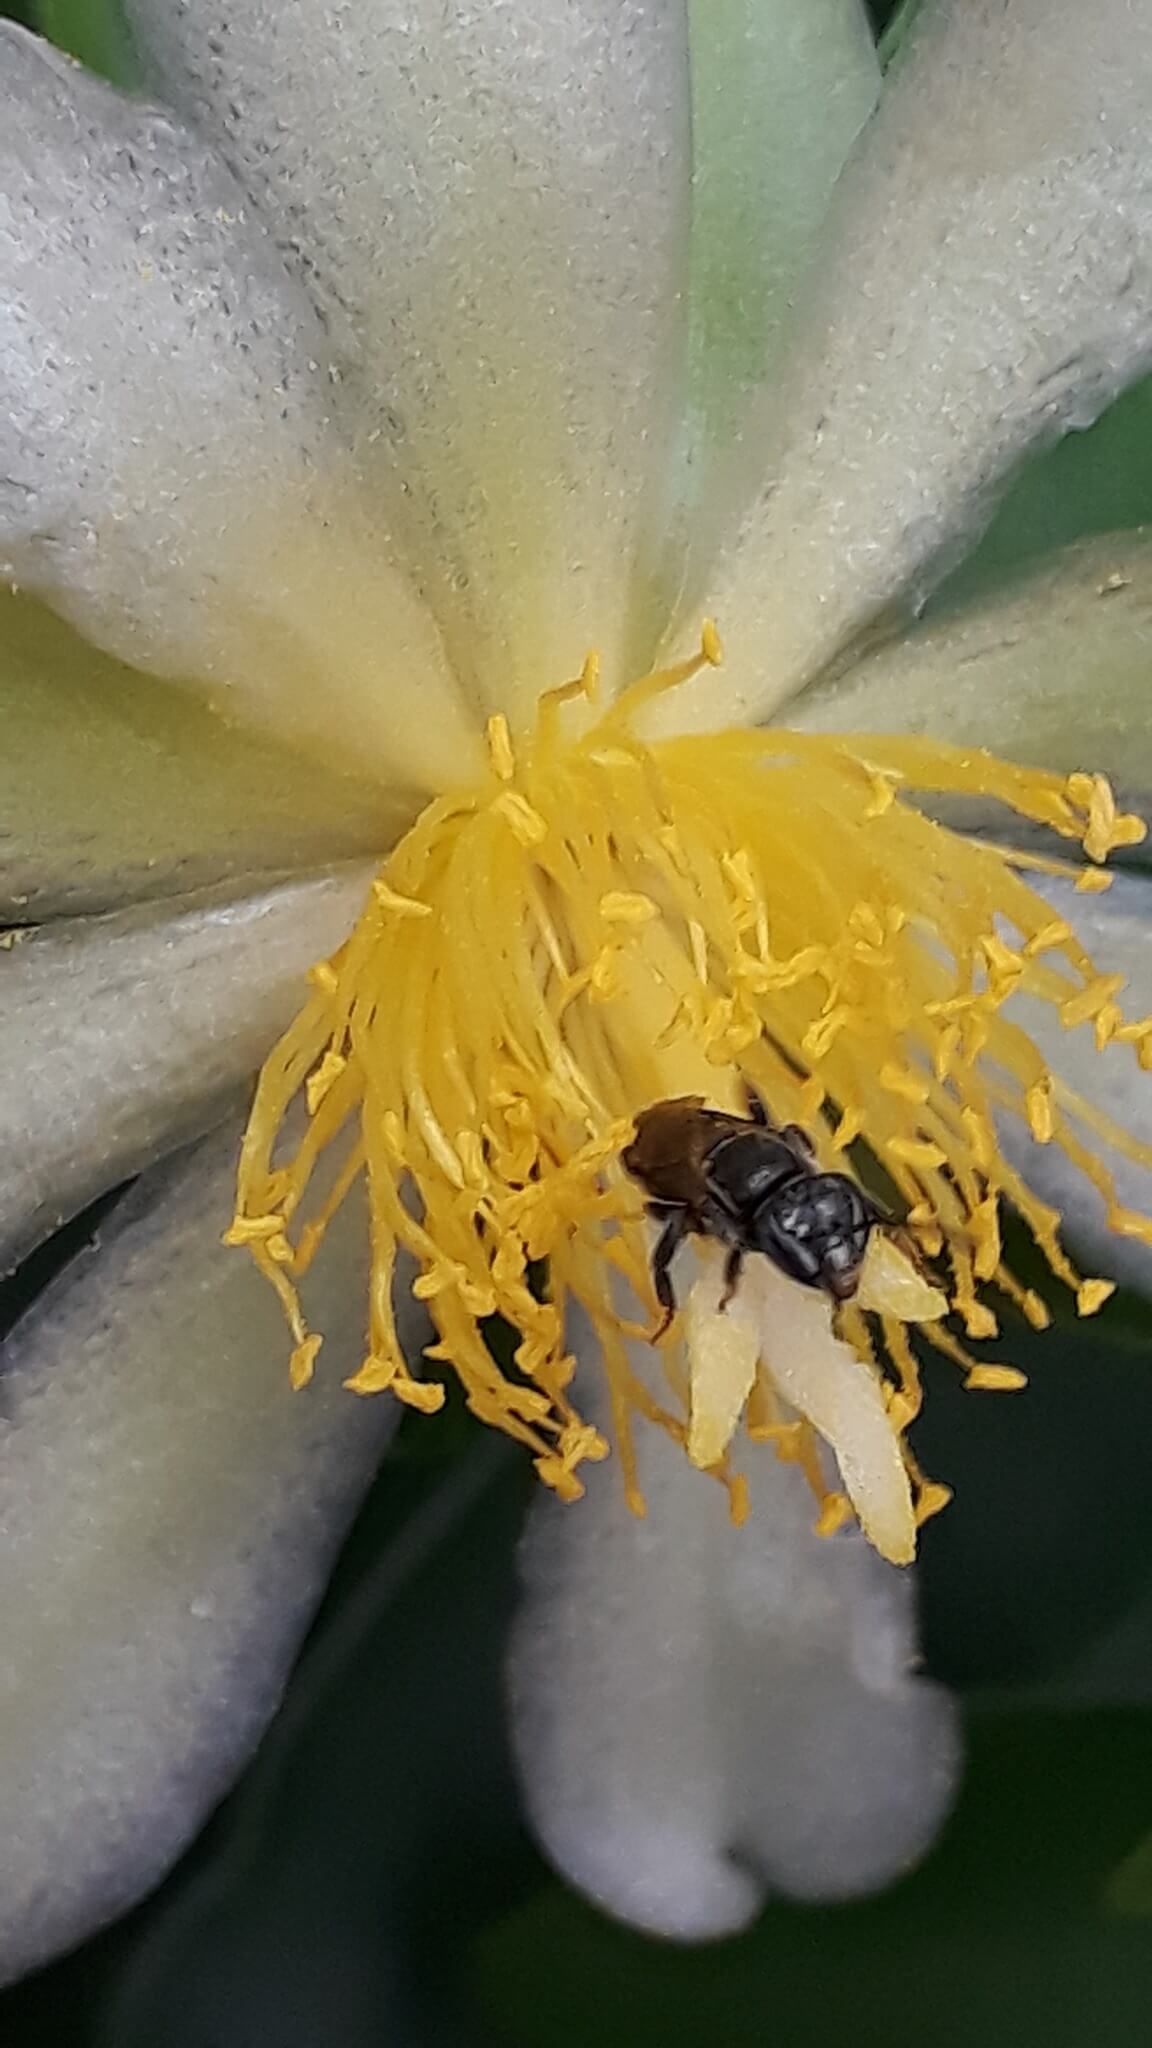 One of the stingless bee species raised by Gerson Pinheiro pollinating a flower. Image credit: Courtesy of Gerson Pinheiro